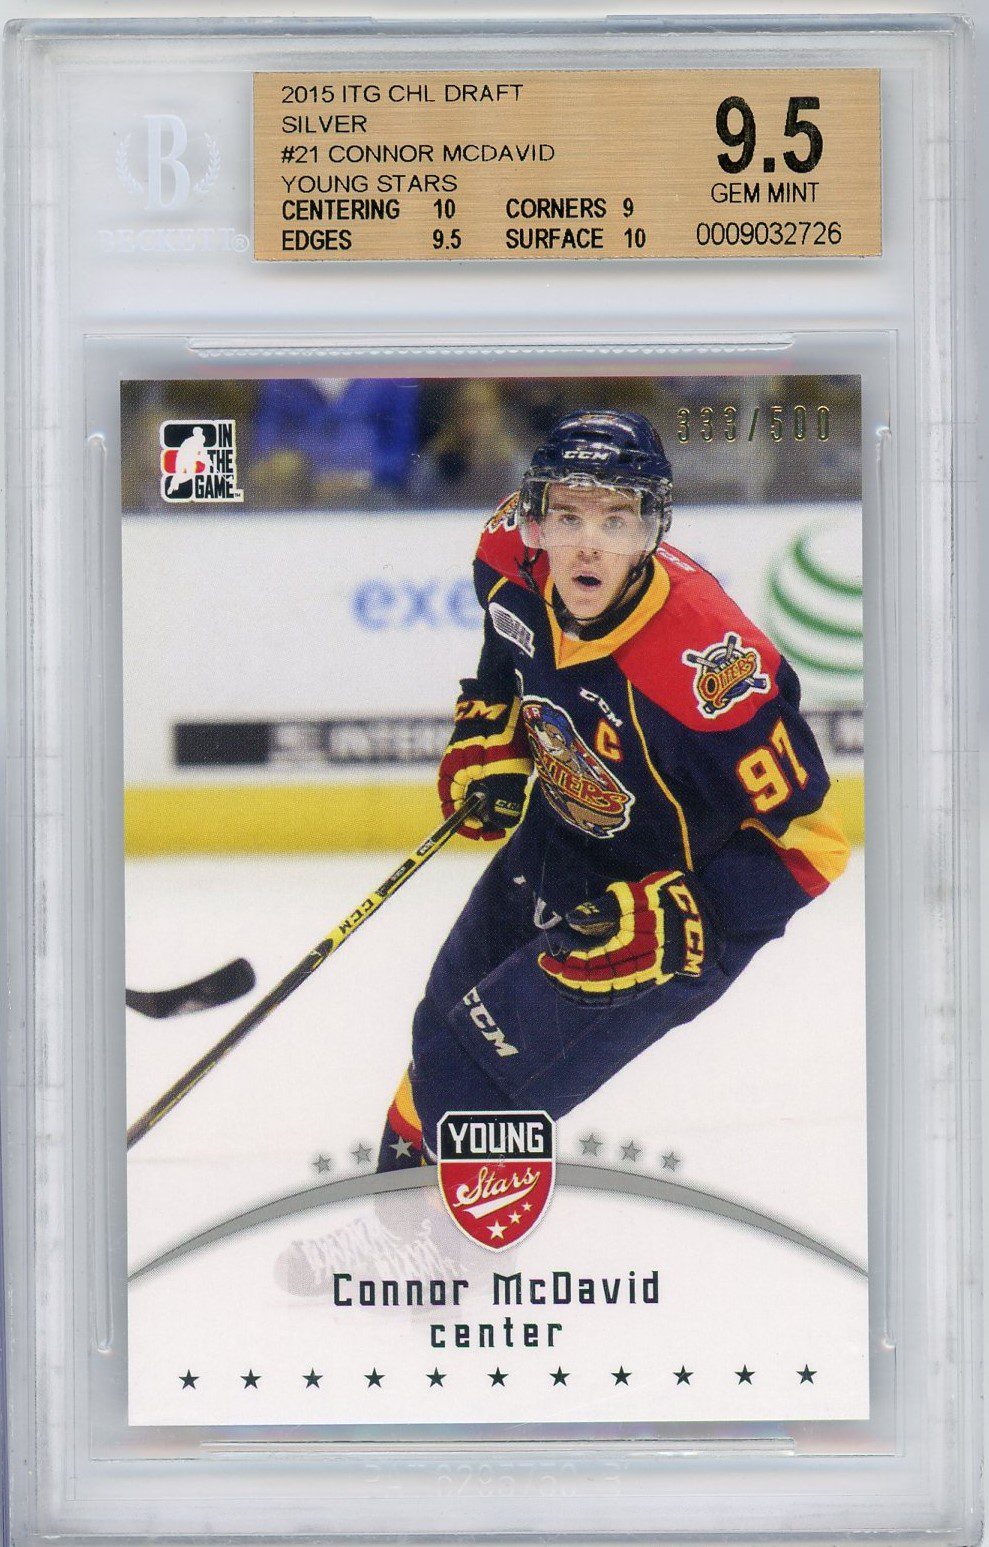  CONNOR MCDAVID DRAFT CARD #1 LEAF ITG ROOKIE WEARING CHL JERSEY  PSA GEM MINT 10! 2 TIME SCORING CHAMP : Collectibles & Fine Art